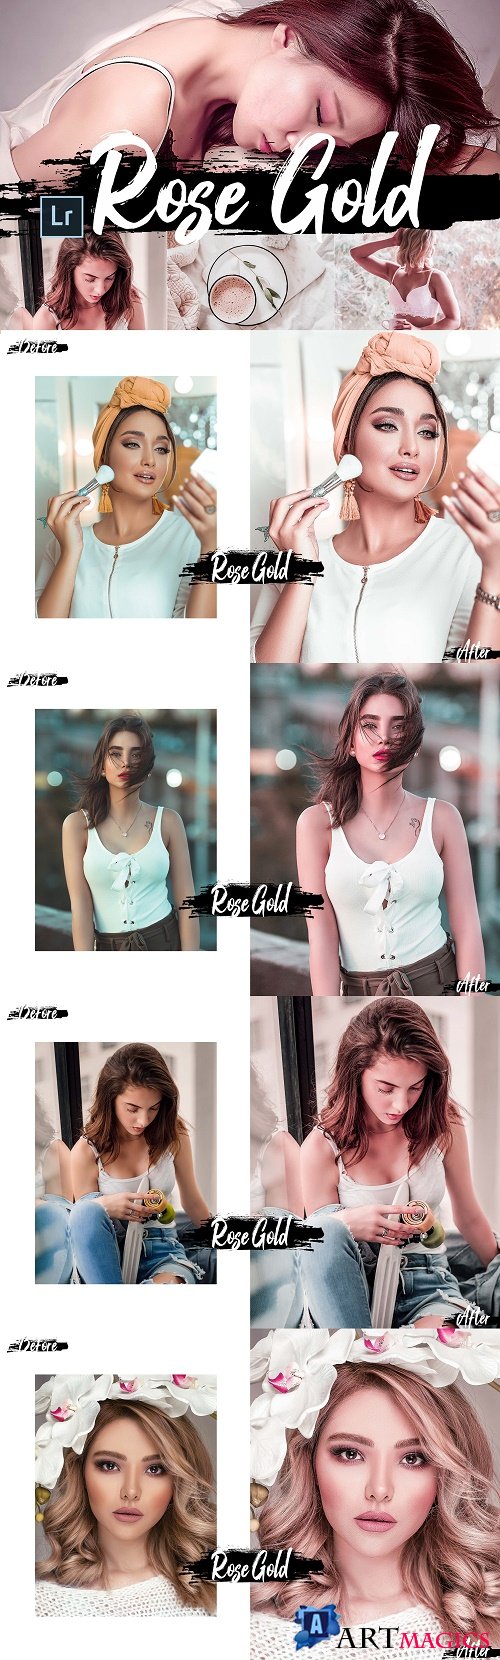 06 Rose Gold Lightroom Presets and ACR preset, pink theme - 430330